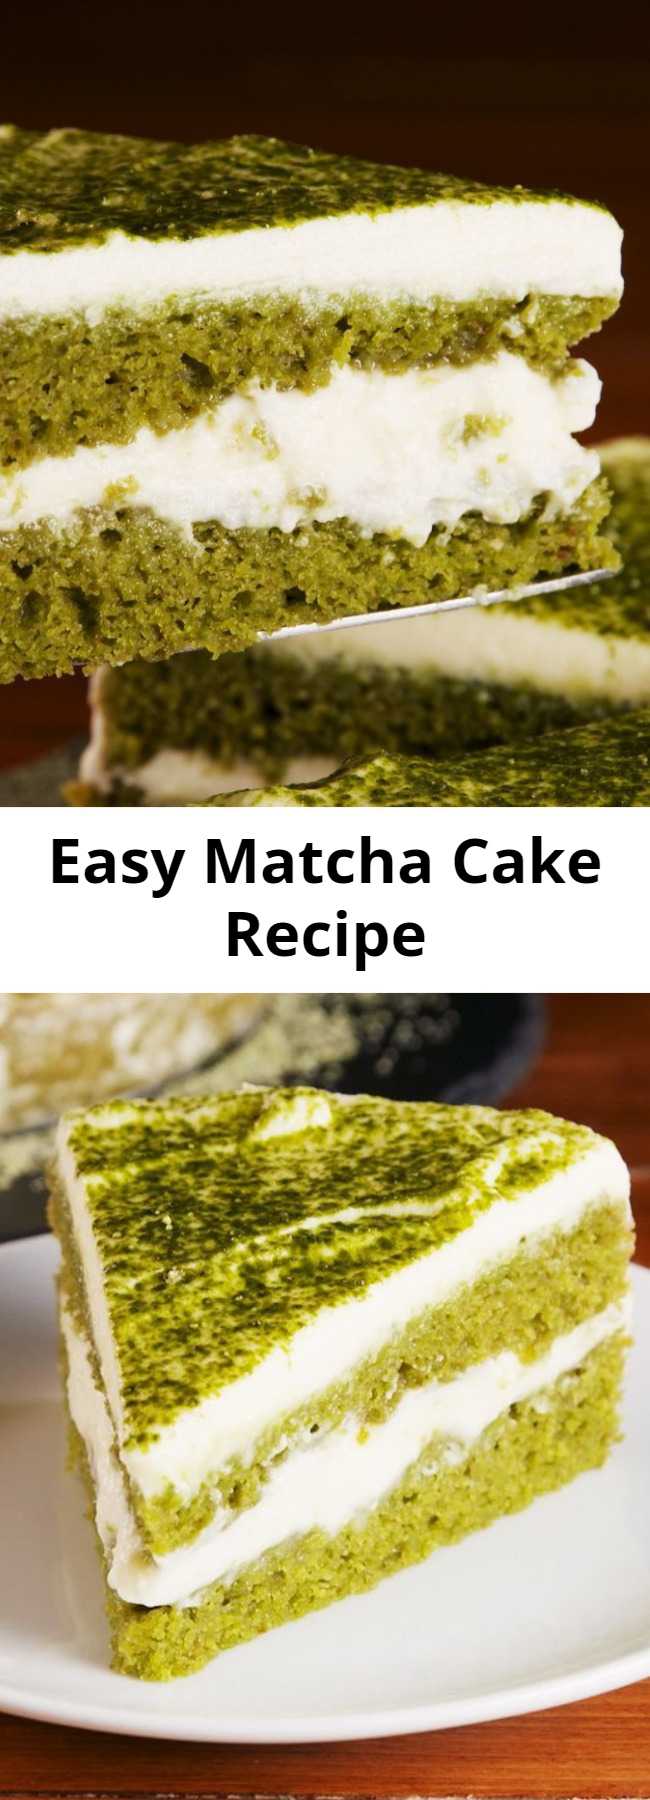 Easy Matcha Cake Recipe - Green Tea Lovers are going to be obsessed with how light this matcha cake and its accompanying frosting are. Here are our best tips when making this easy recipe!